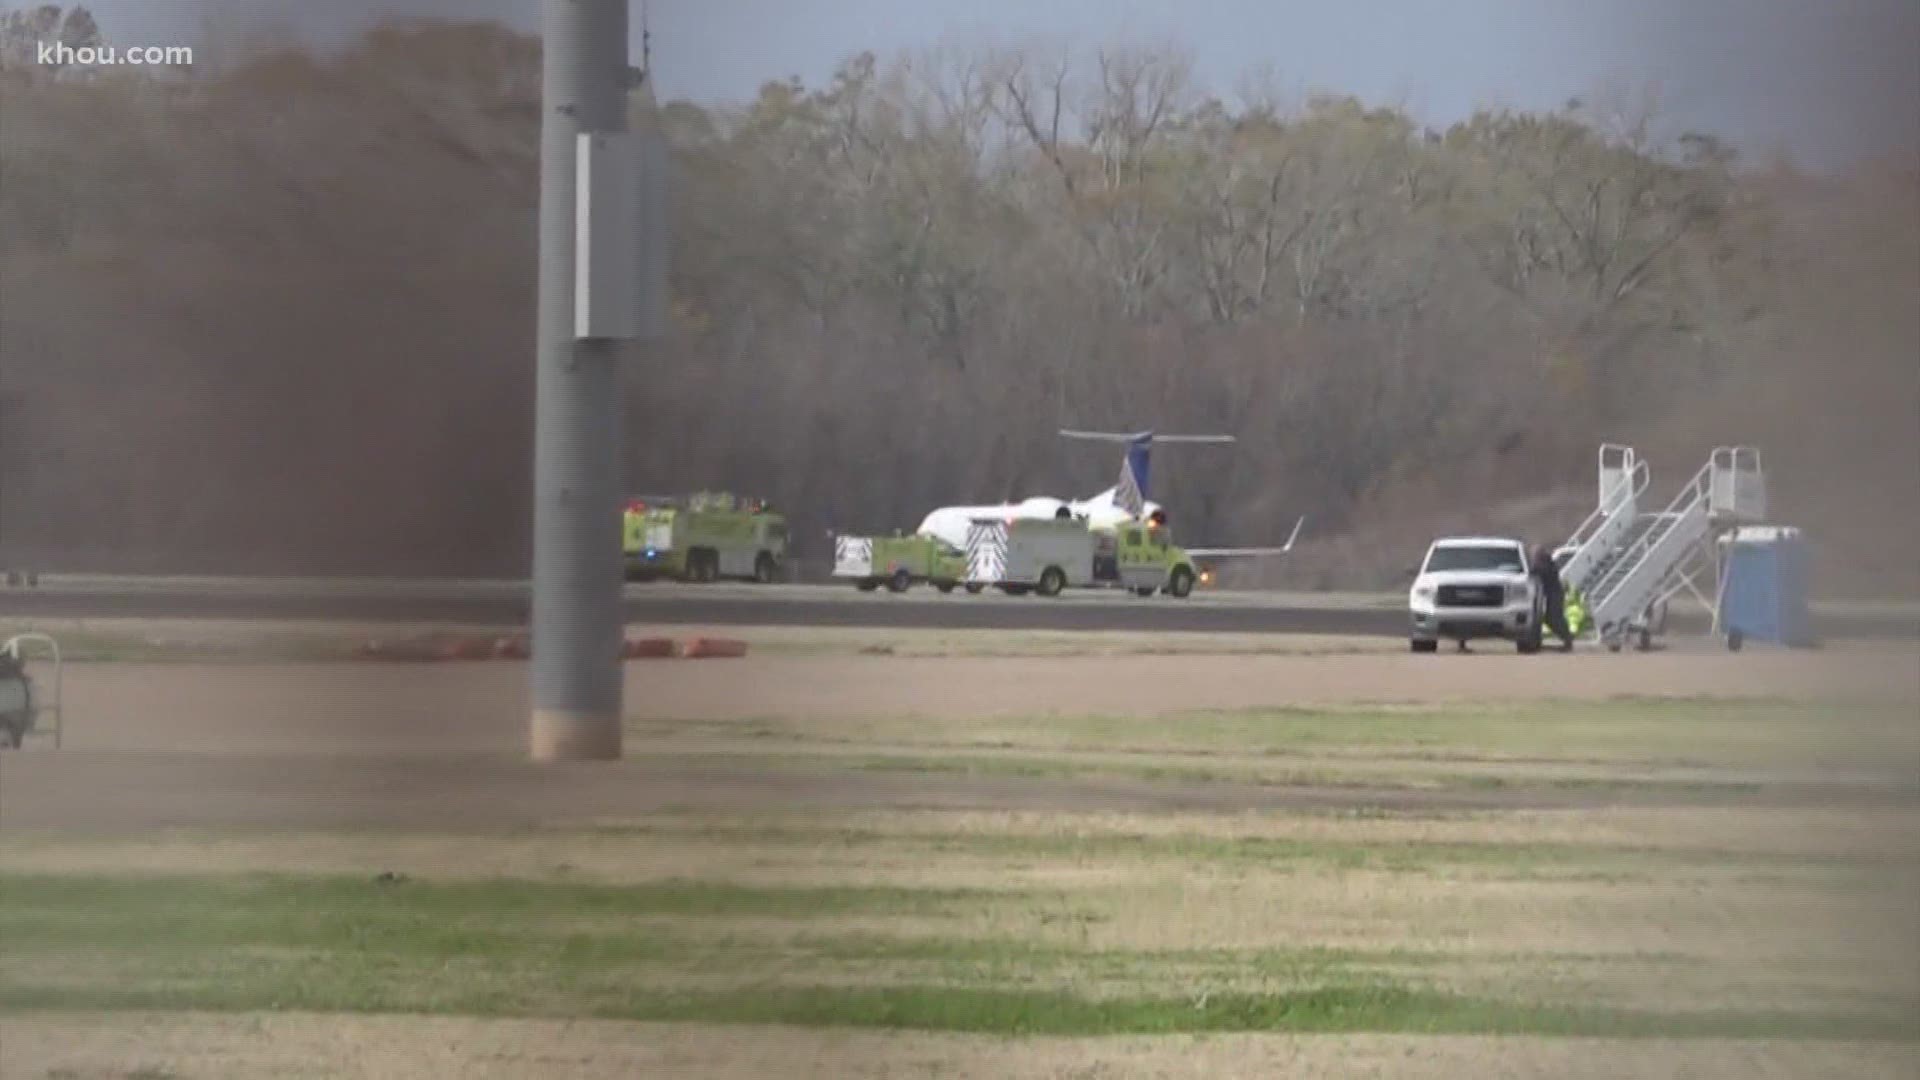 A plane heading from Jackson, Miss. to Houston made an unscheduled stop Wednesday after a report of explosives on board.